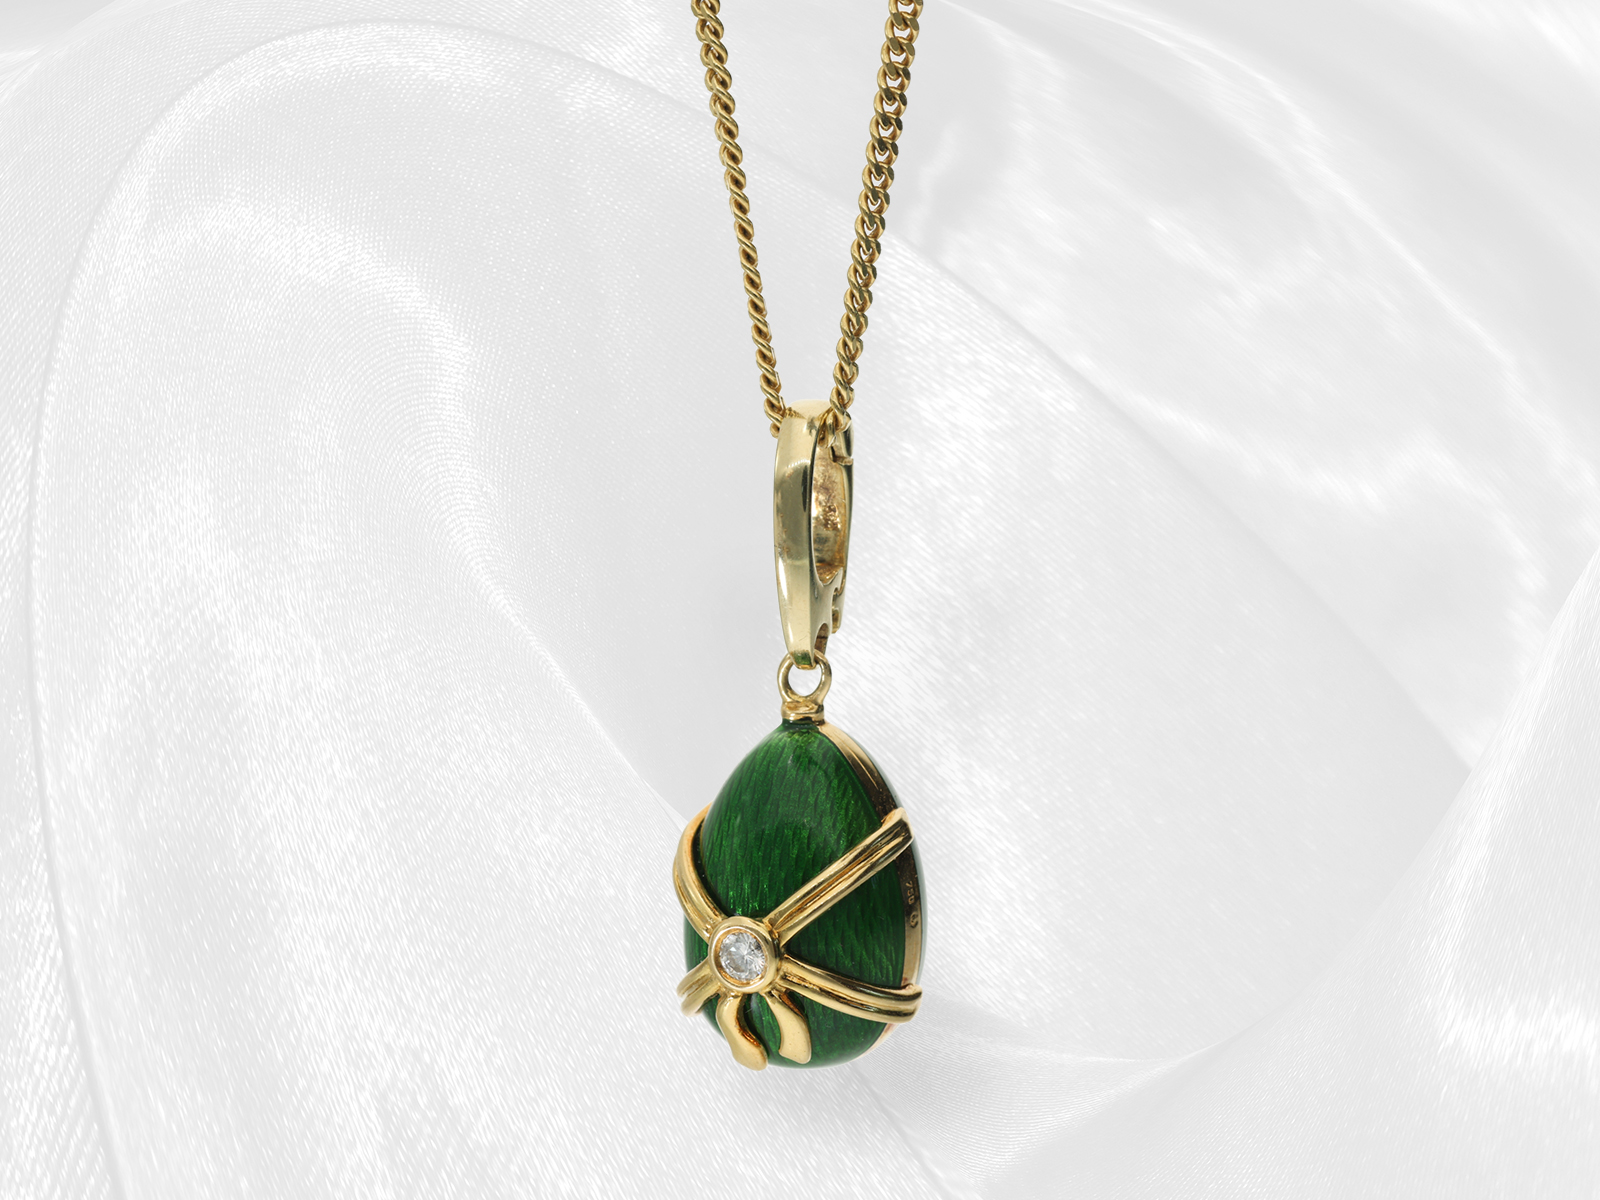 High-quality Fabergé enamel pendant with brilliant-cut diamonds, 18K gold, limited edition, with nec - Image 9 of 12